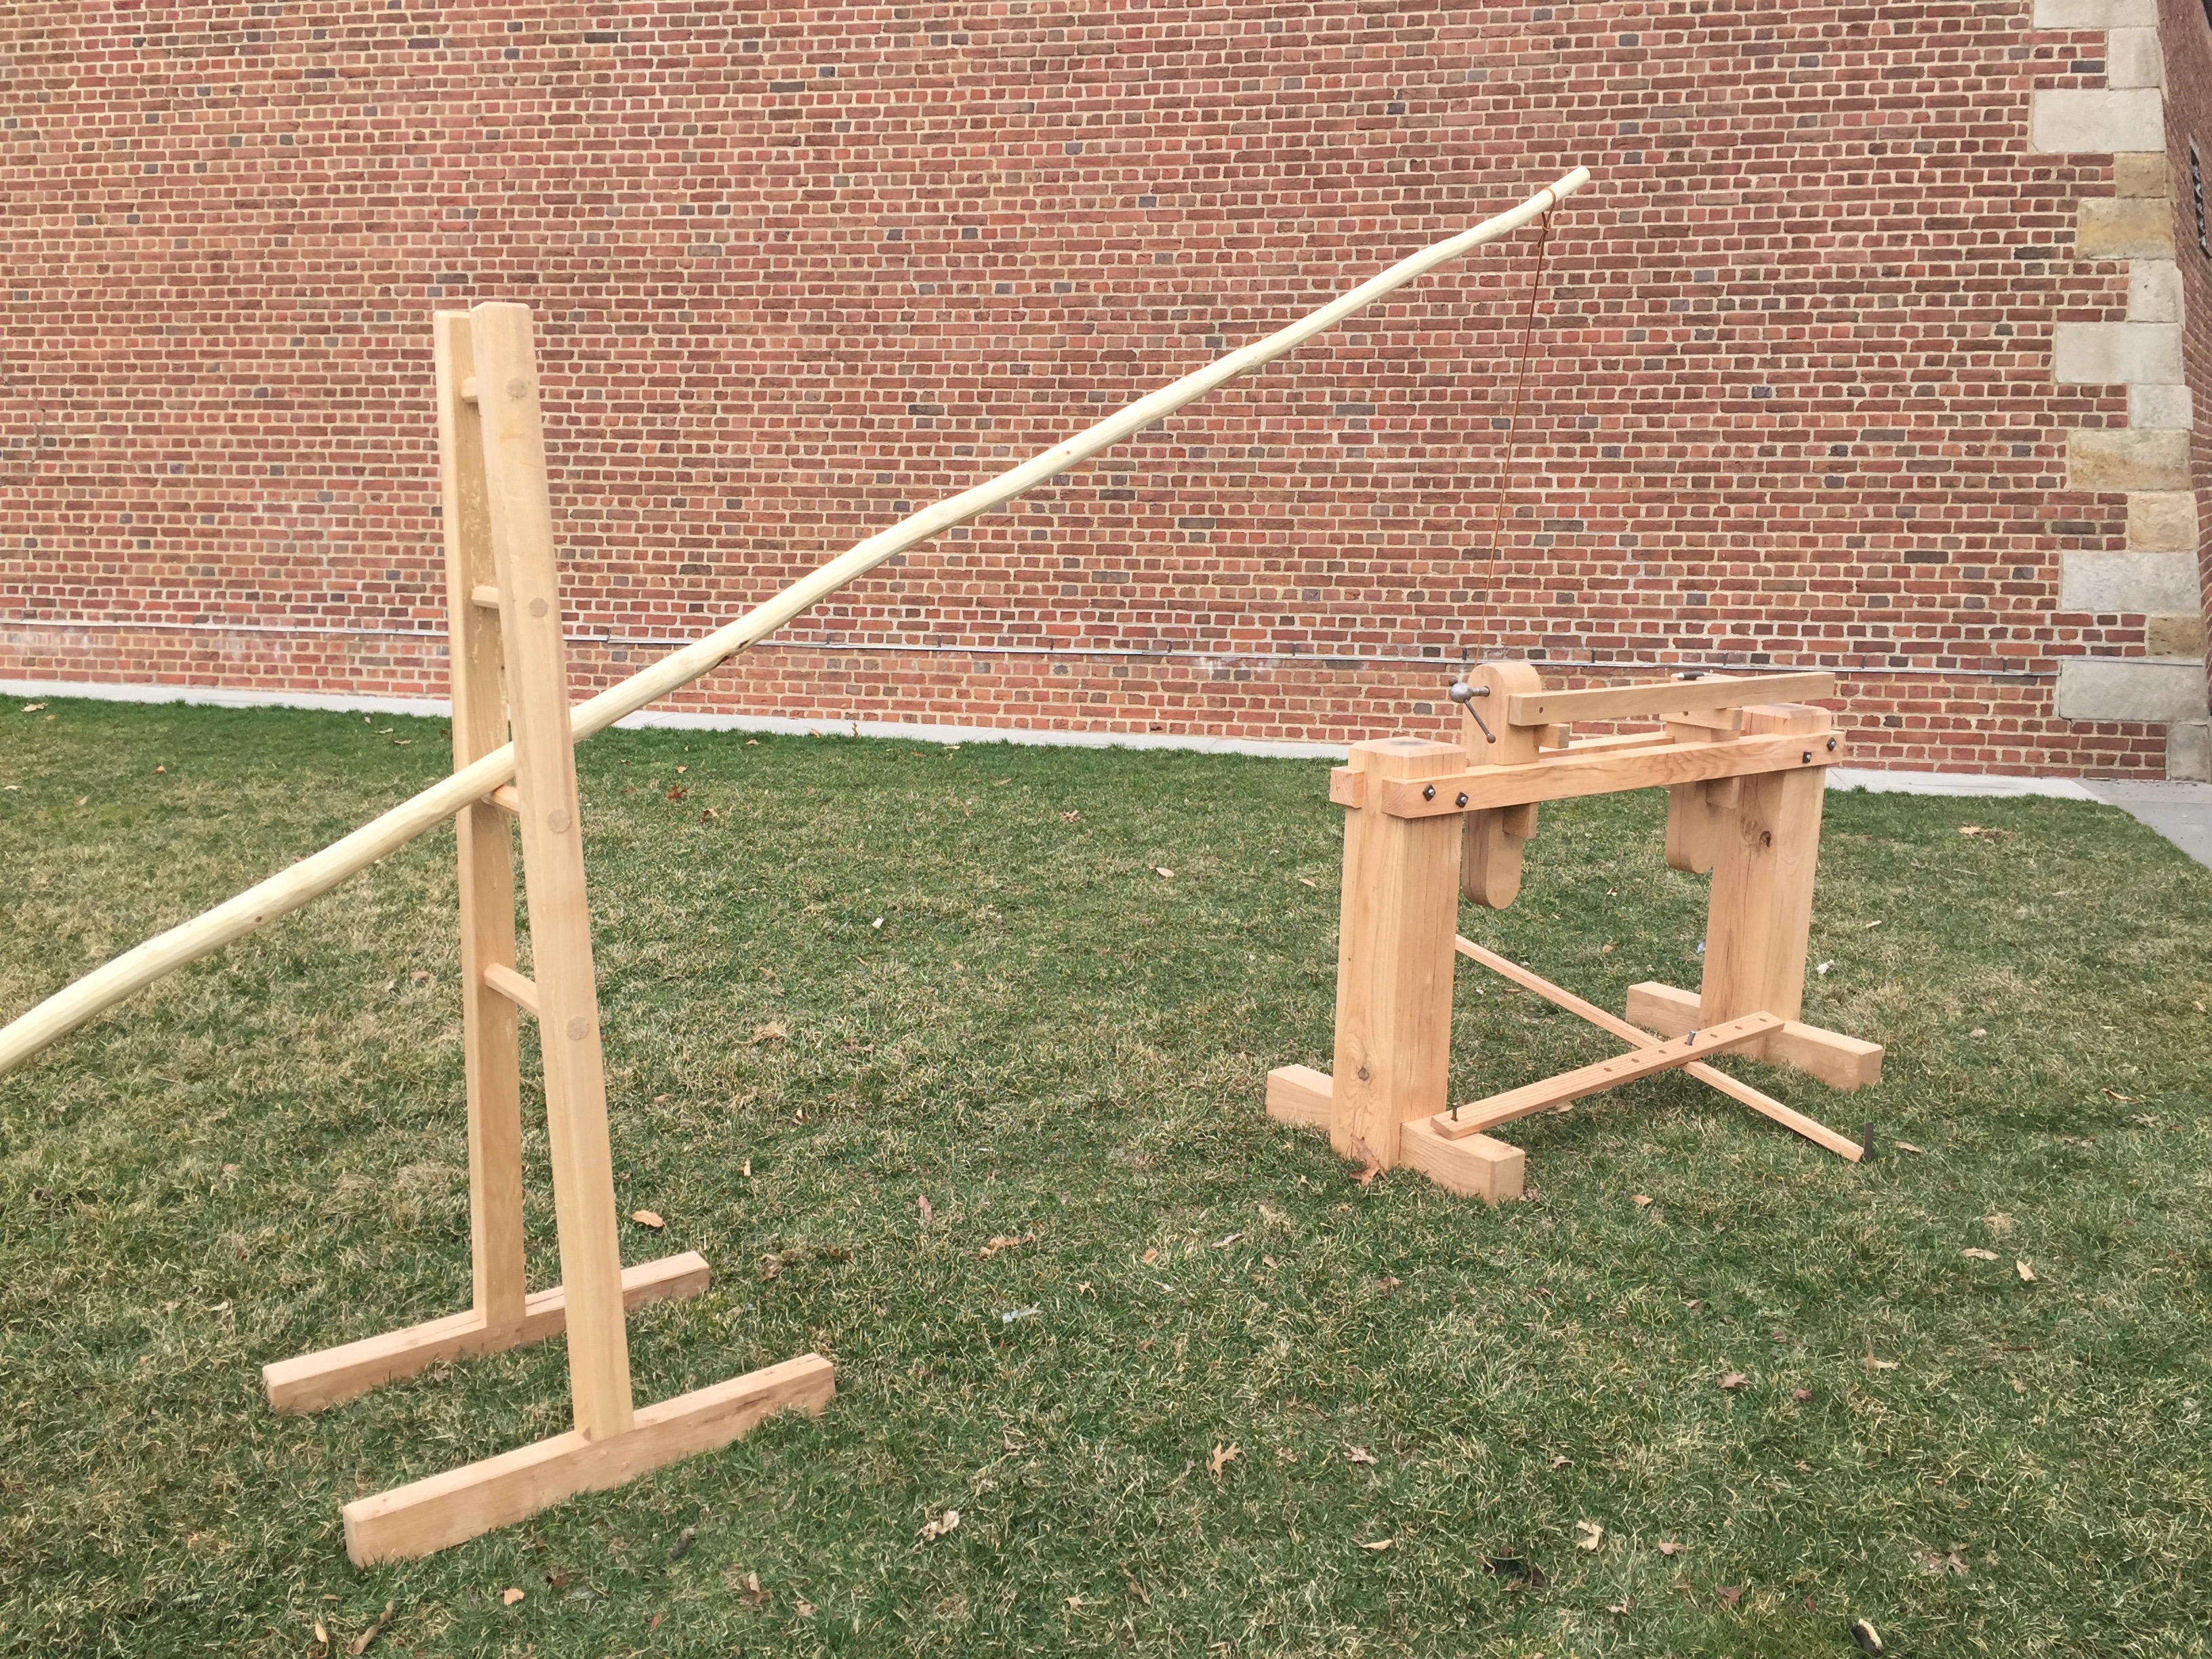 Spring pole lathe based on the Moxon drawings with free standing pole support and pole